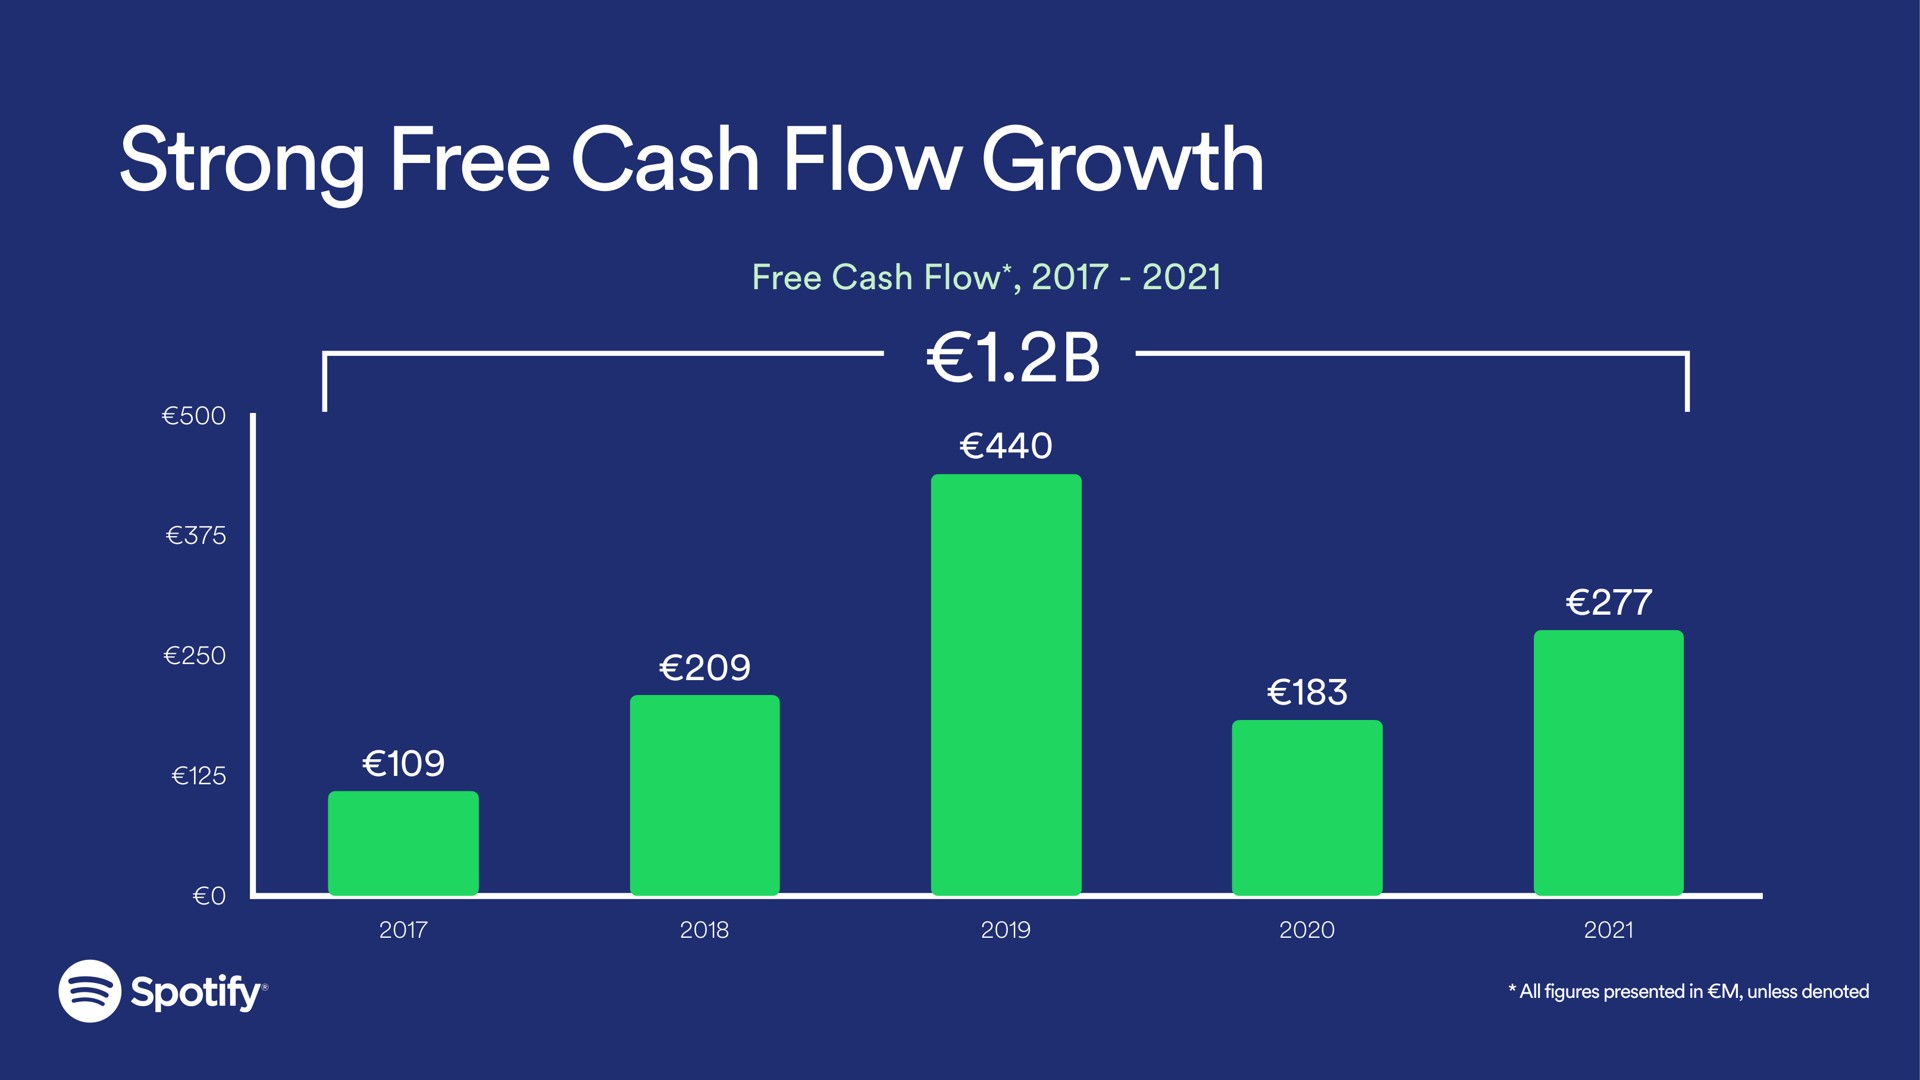 strong free cash flow growth | Spotify